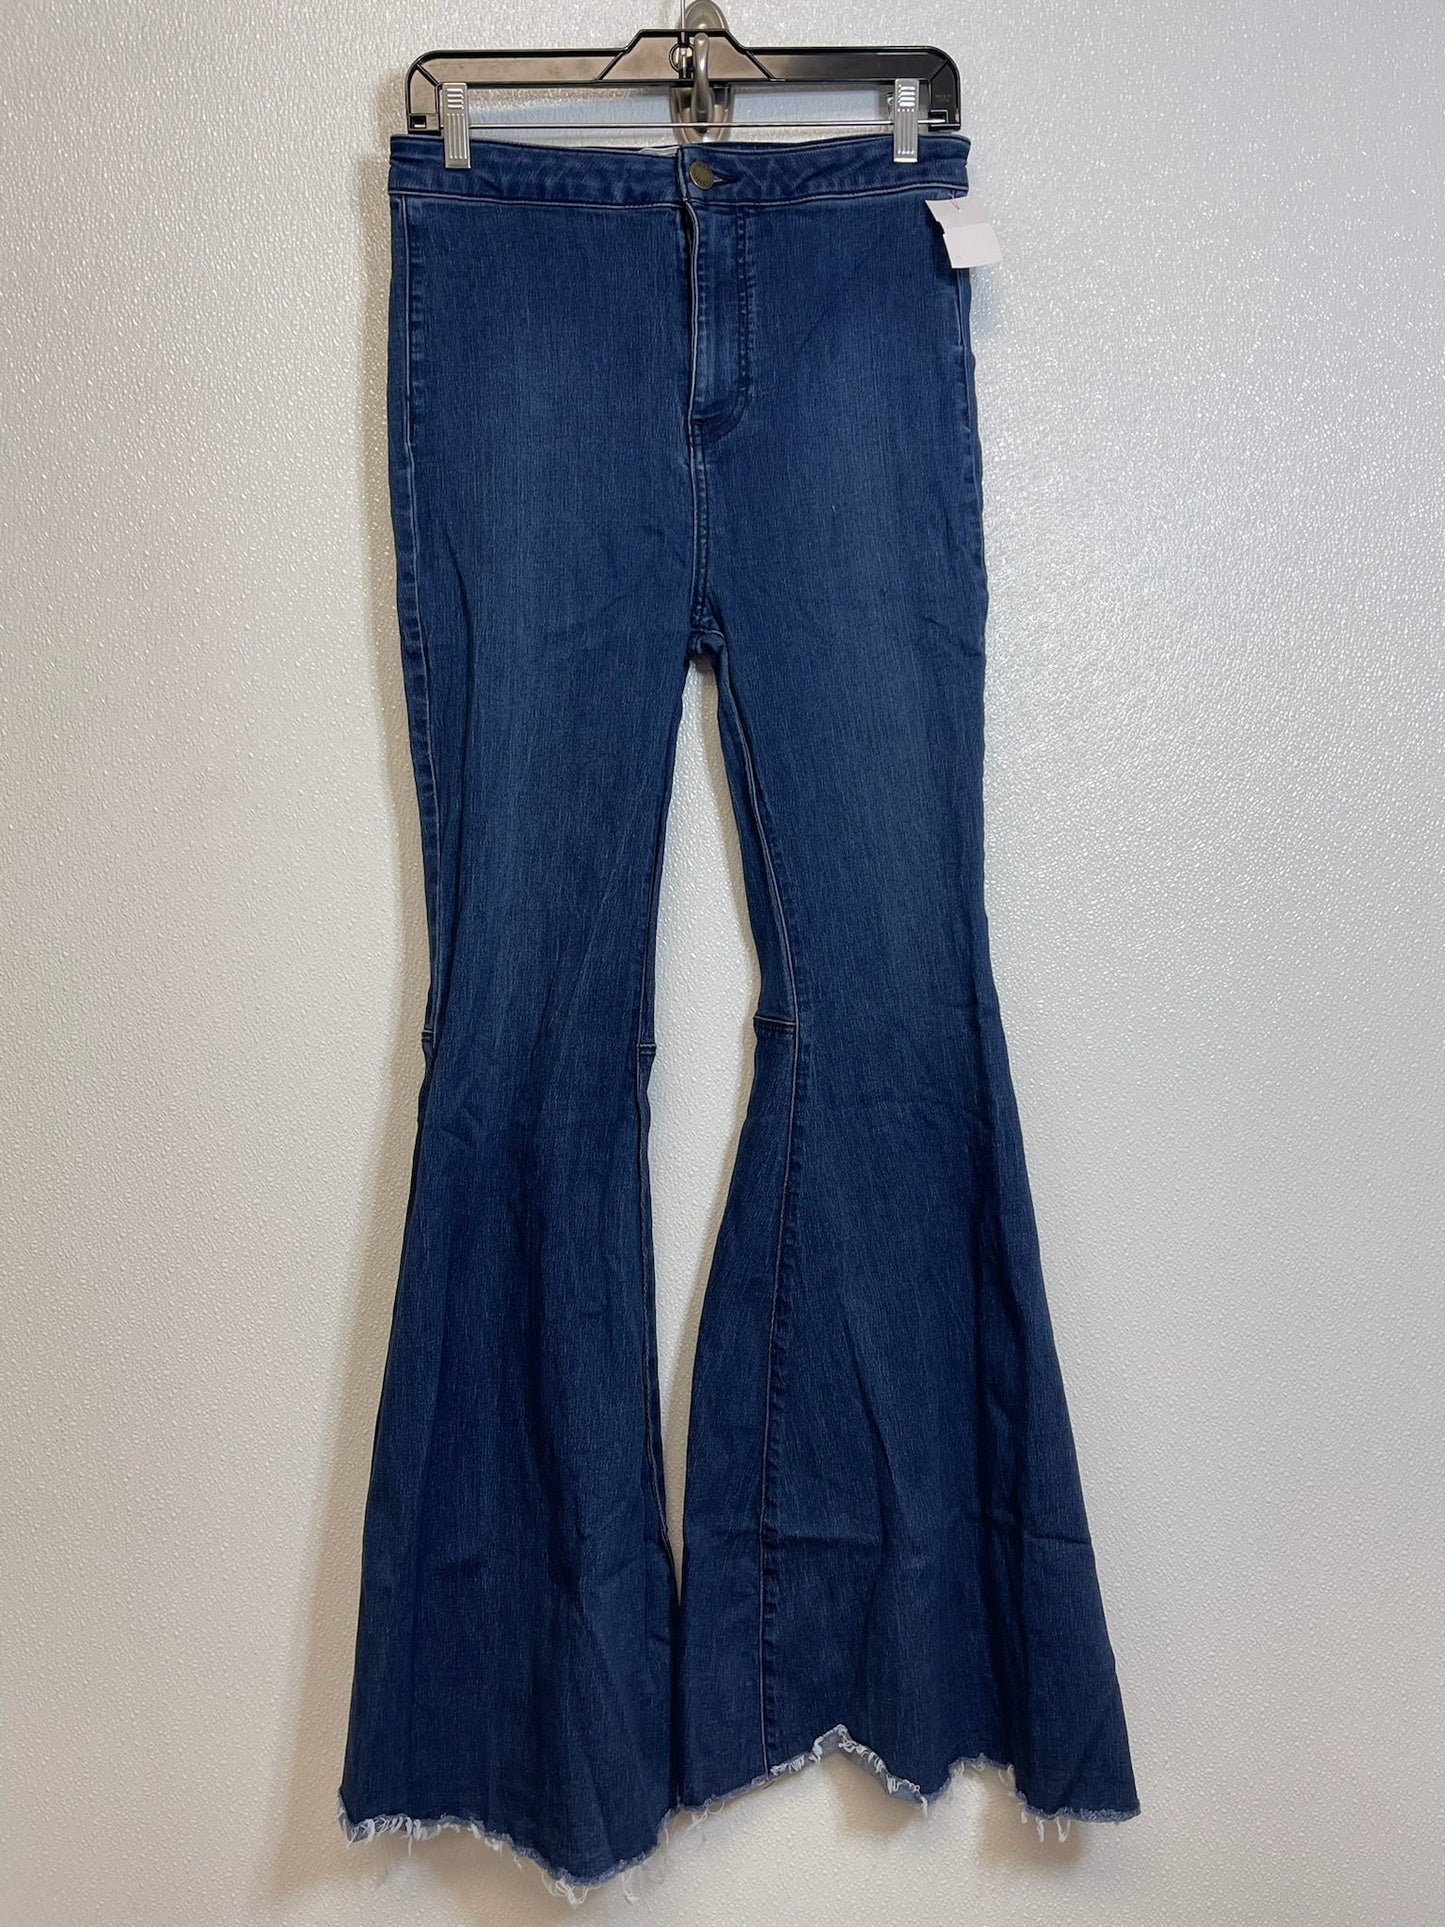 Denim Jeans Flared Free People, Size 8